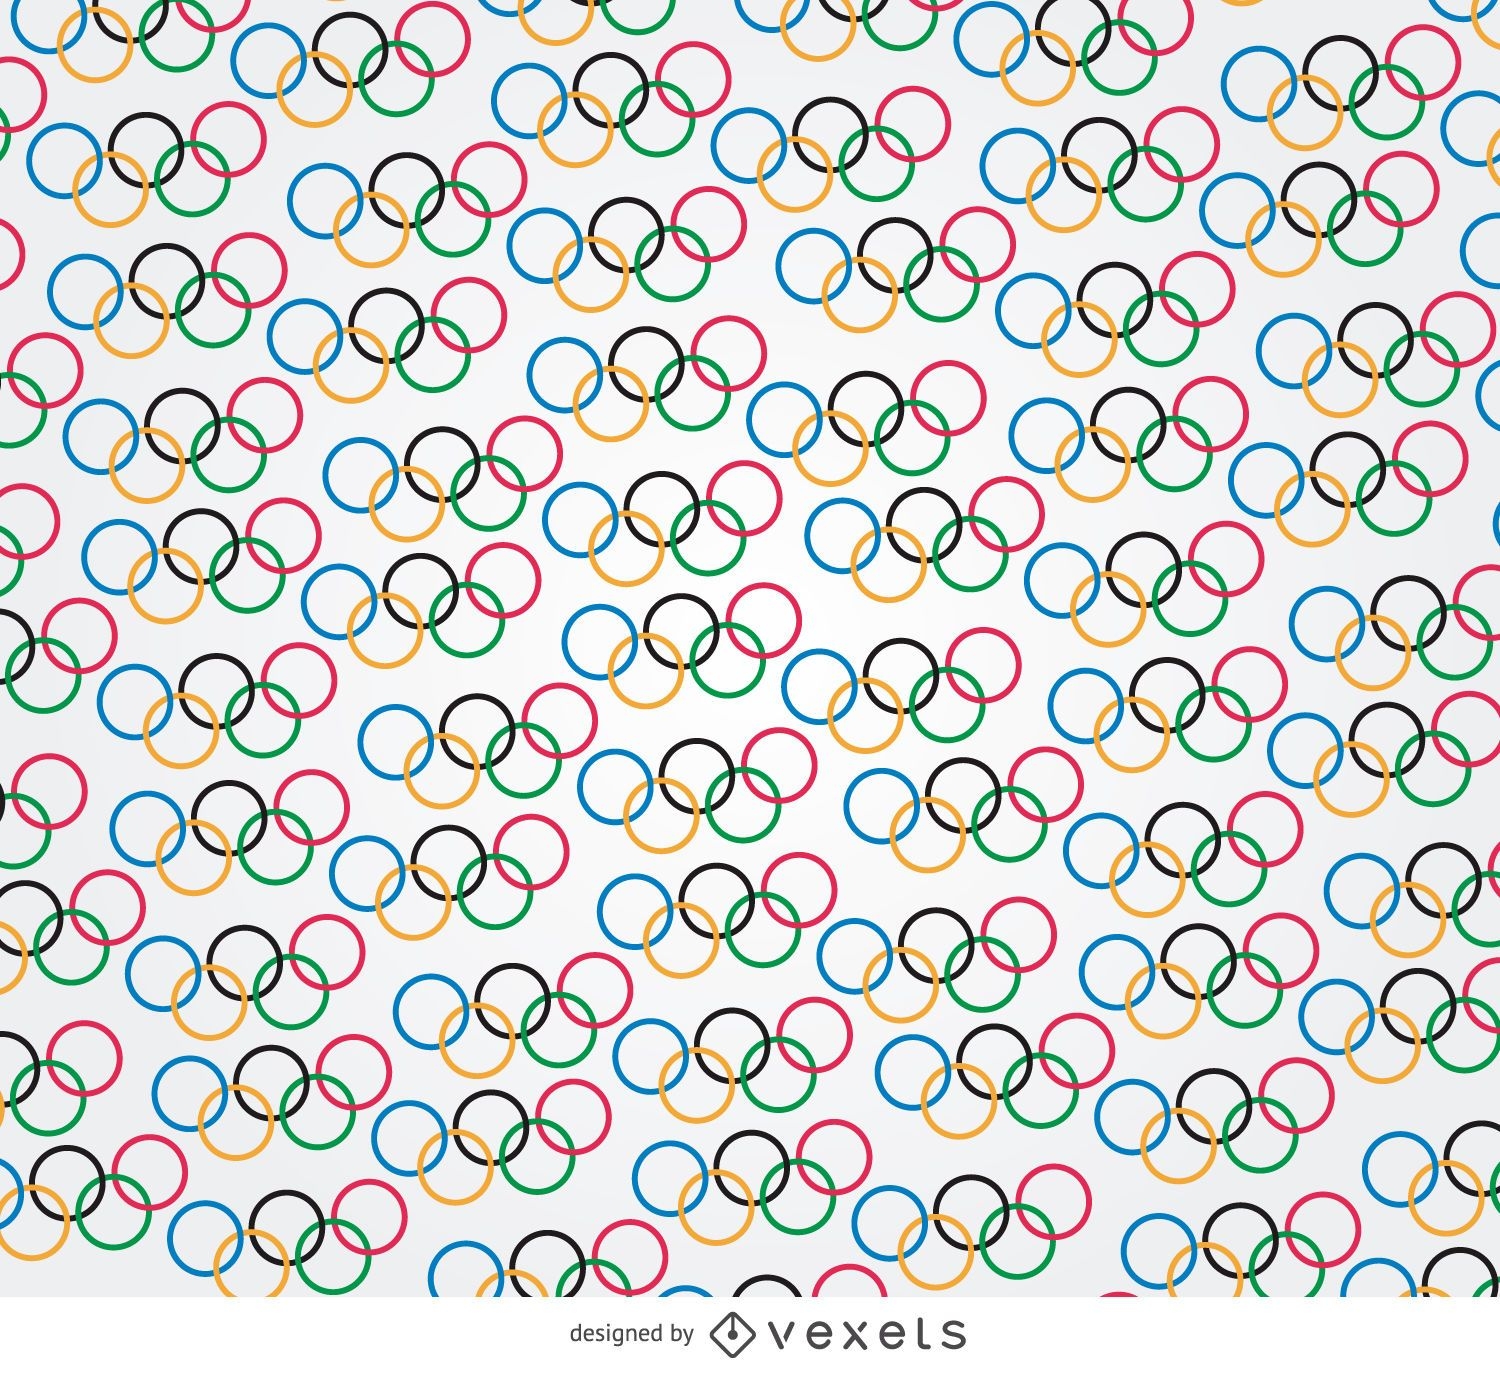 Olympisches Ringmuster